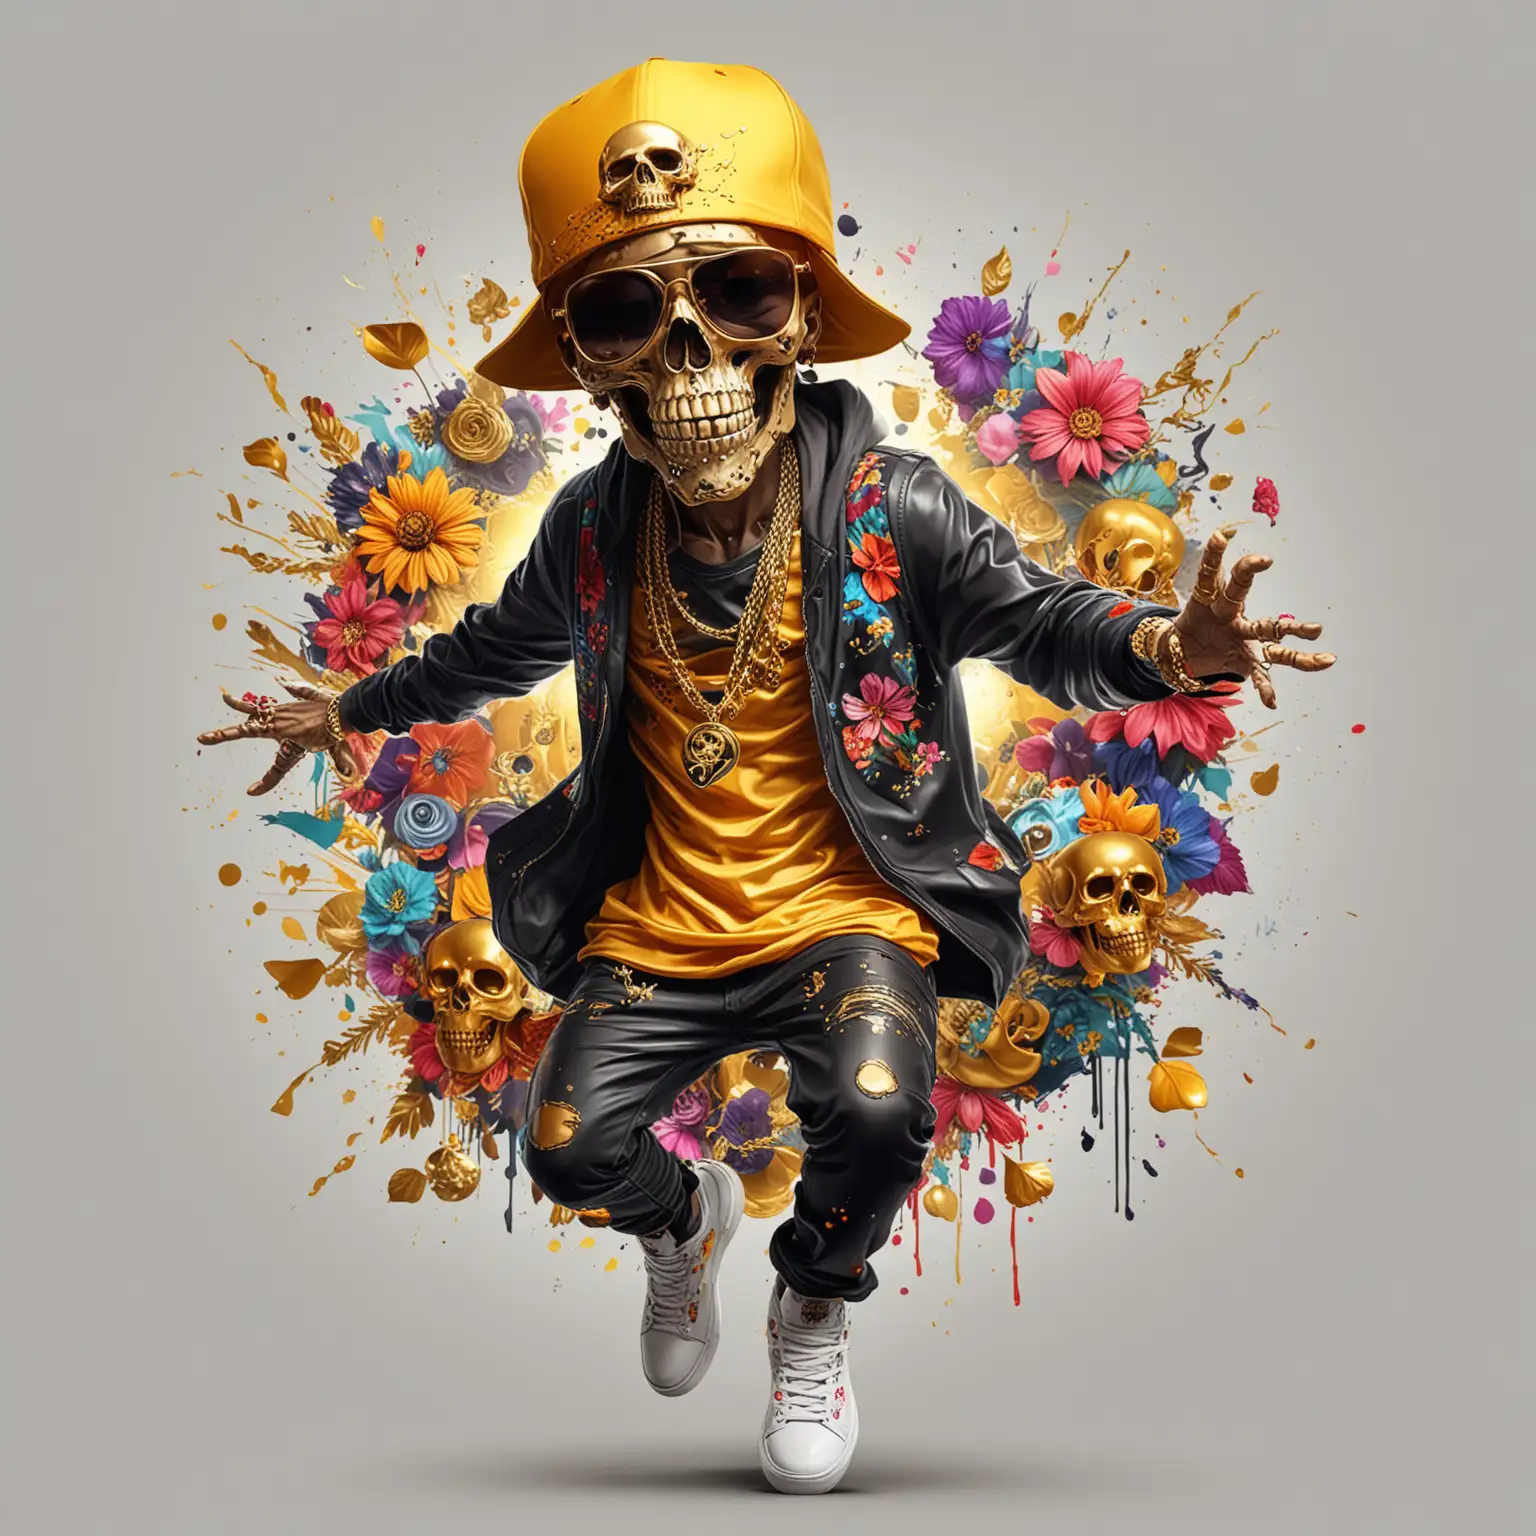 Colorful Abstract Hip Hop Halloween Floral Dance with Golden Skull and Graffiti Cartoon